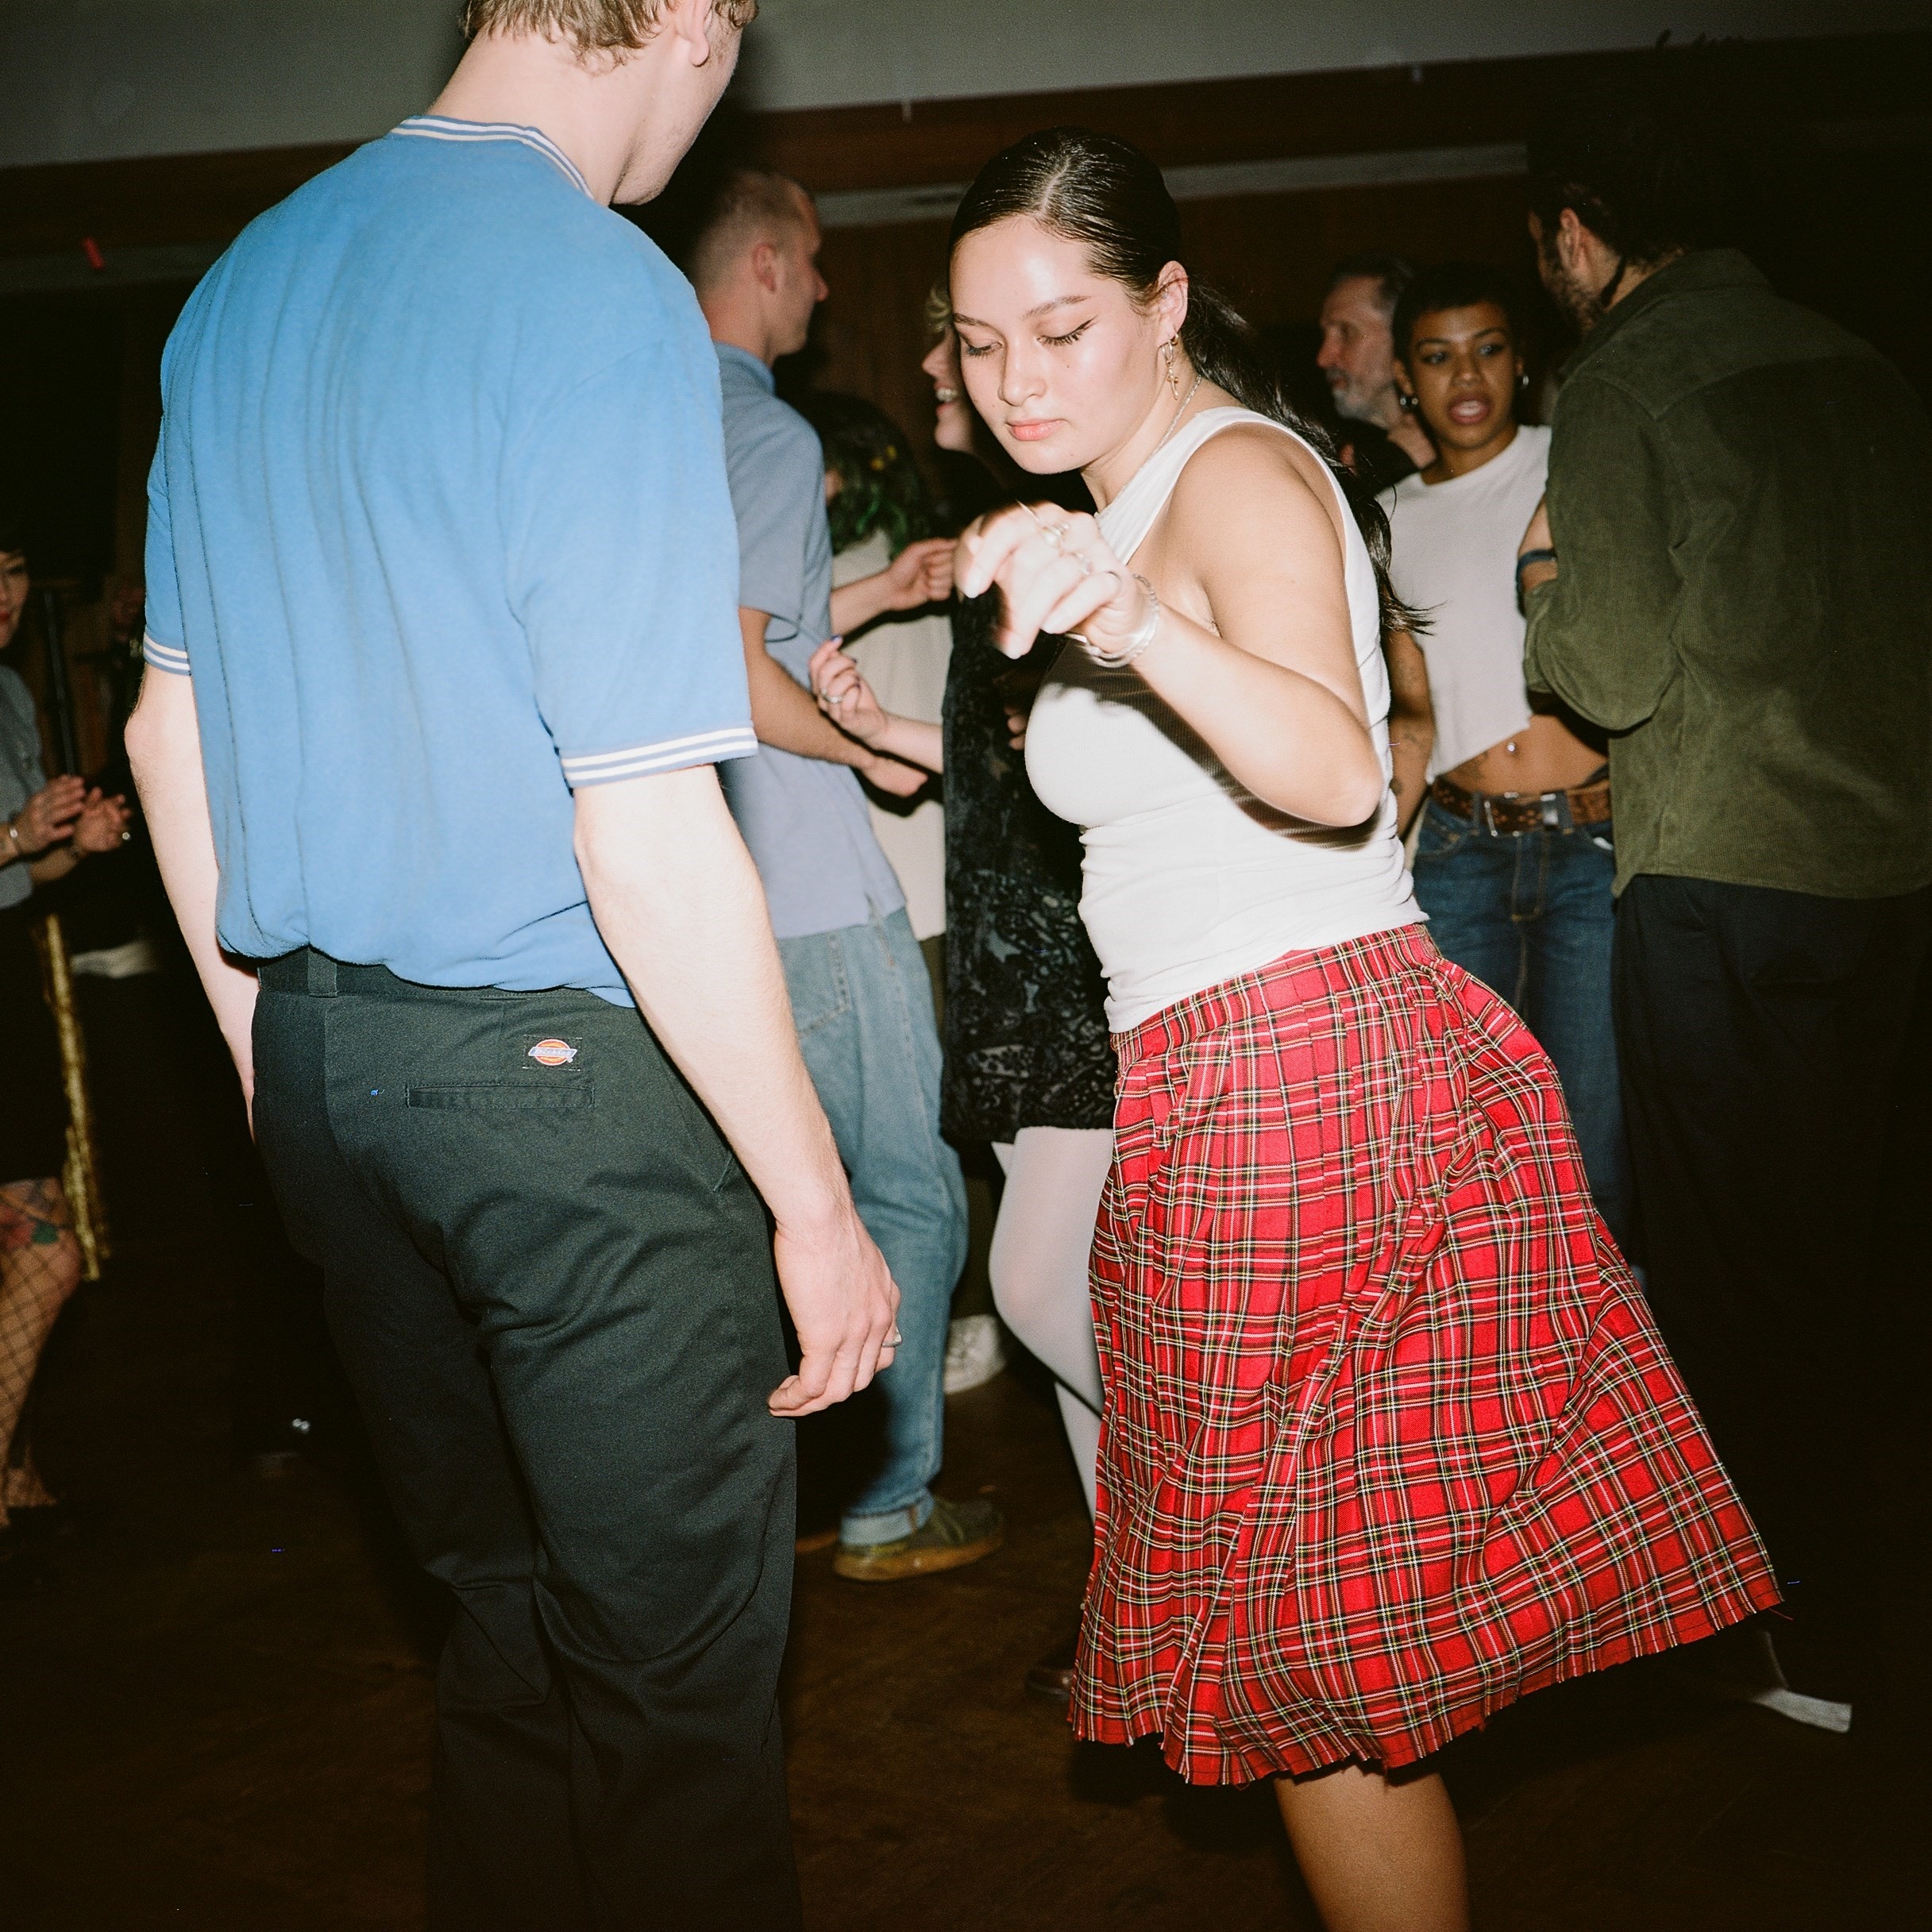 Northern soul scenes are thriving despite the cost of living crisis